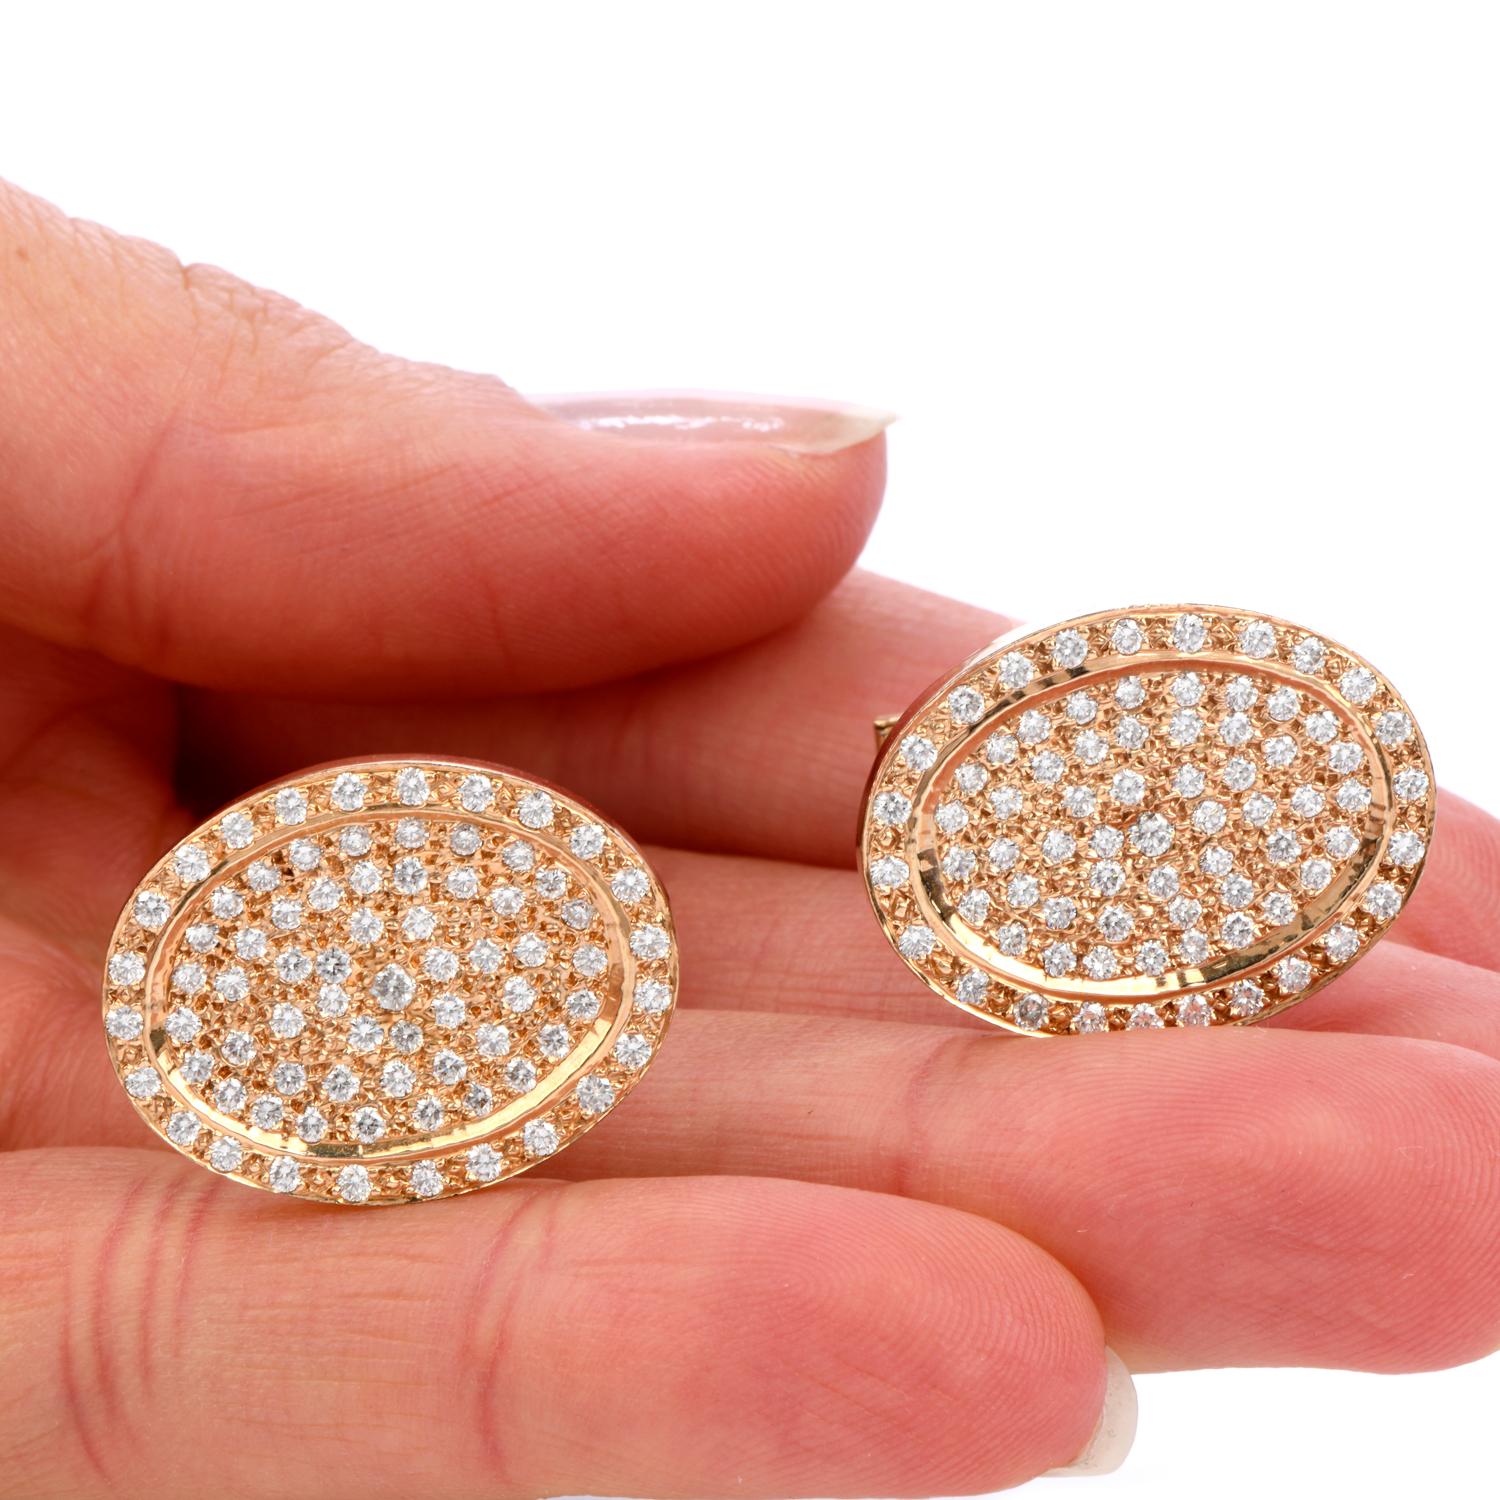 Vintage Oval Shape Cluster Diamond Men’s Gold Cufflinks In Excellent Condition For Sale In Miami, FL